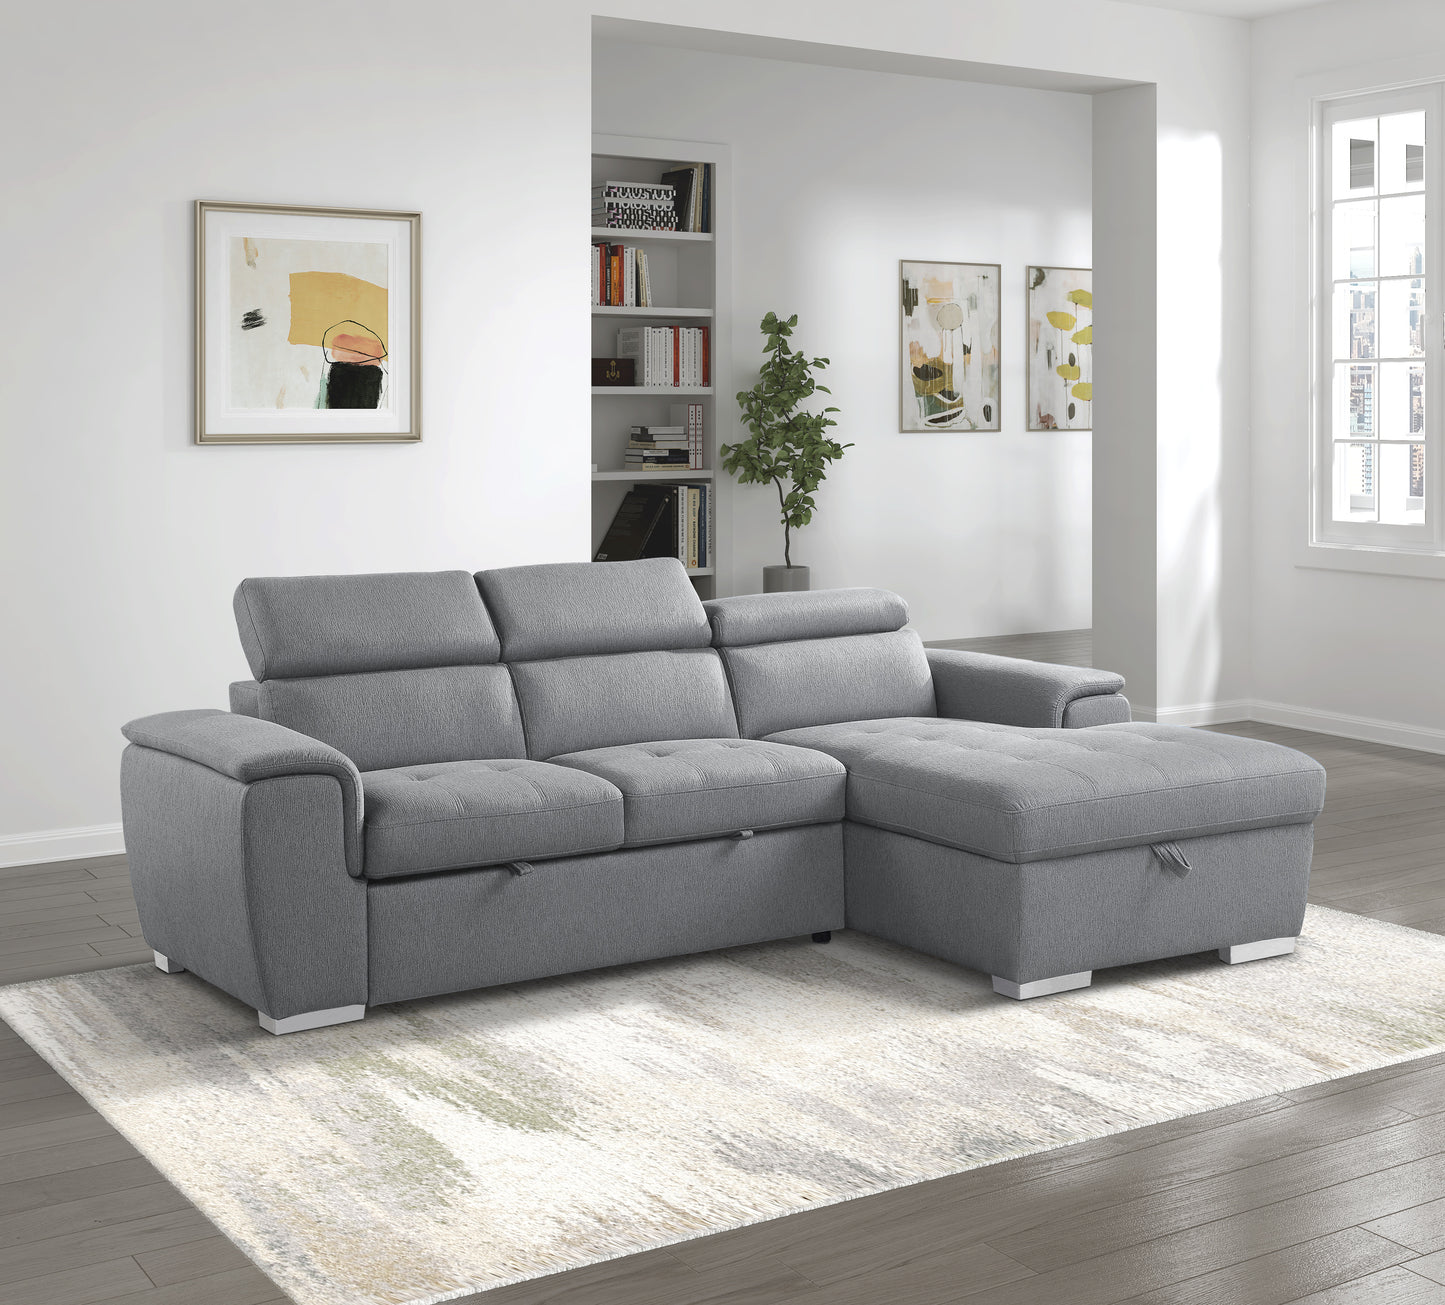 Berel 2-Pcs Sectional w/ Adj. Headrests, Pull-out Bed & Right Chaise w/Hidden Storage GREY